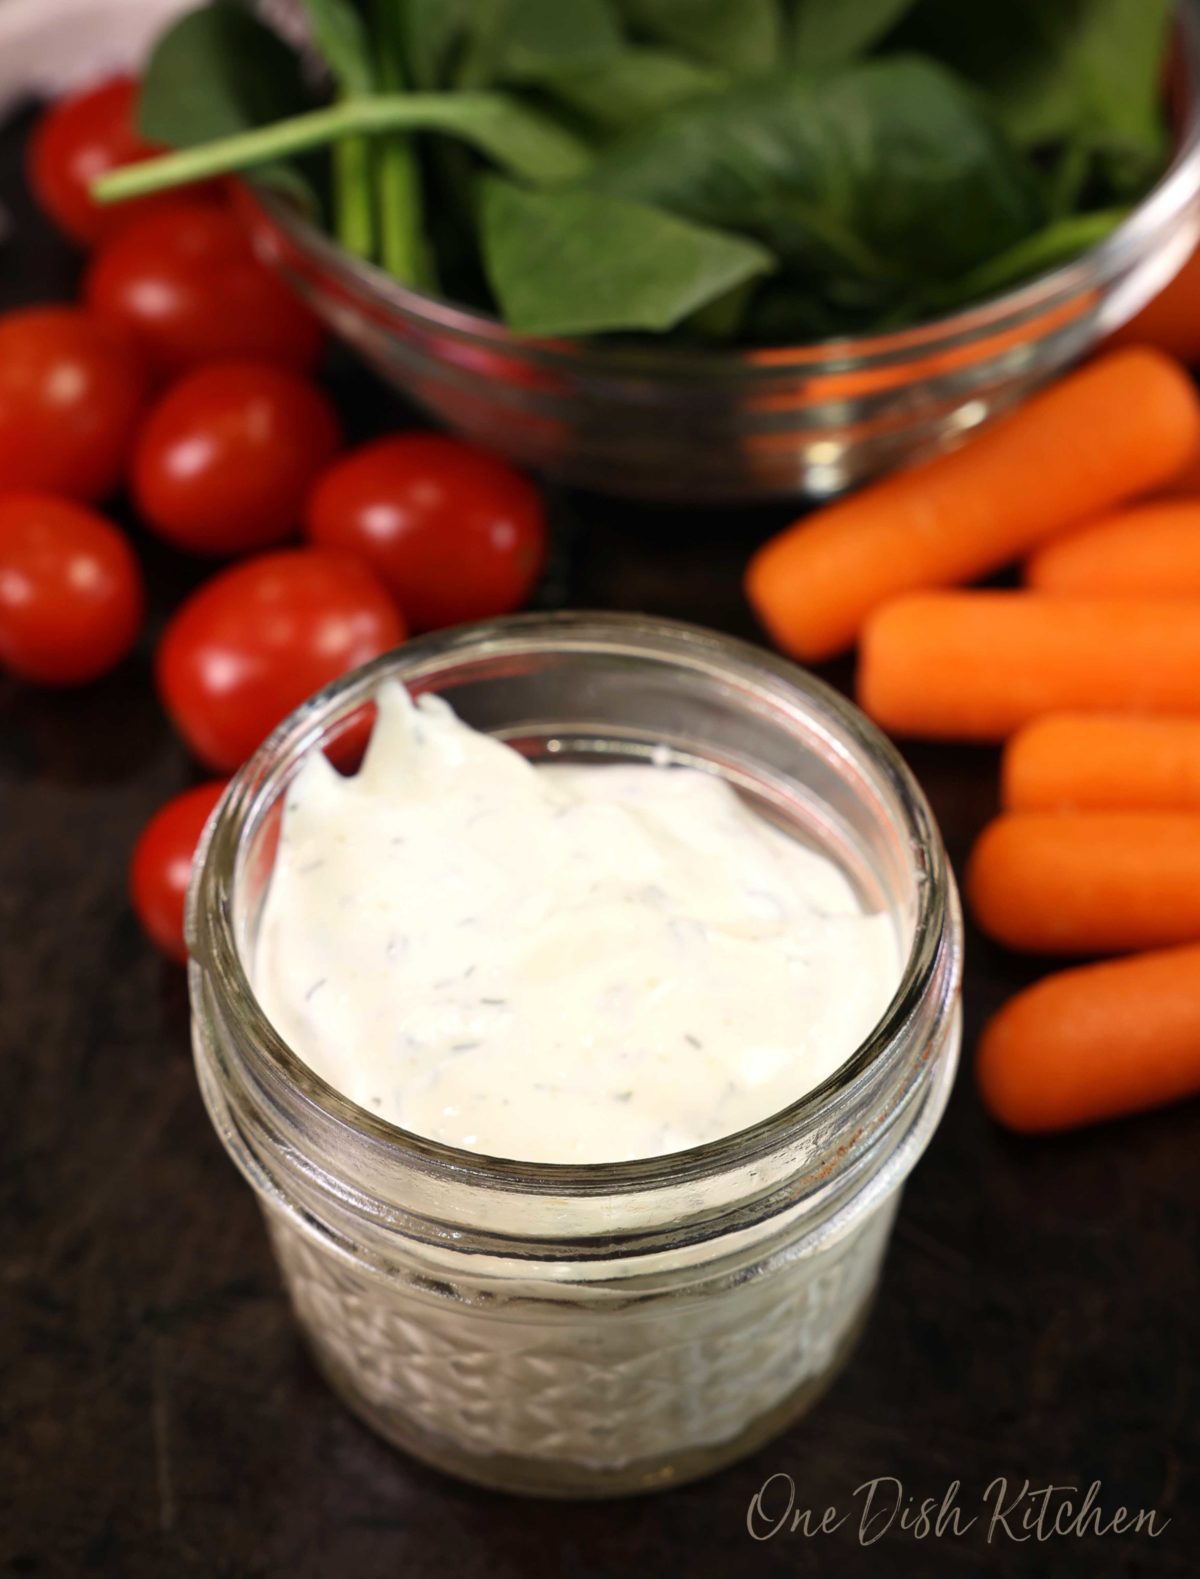 a small clear glass jar of ranch salad dressing next to cherry tomatoes, carrot sticks, and a bowl of spinach.